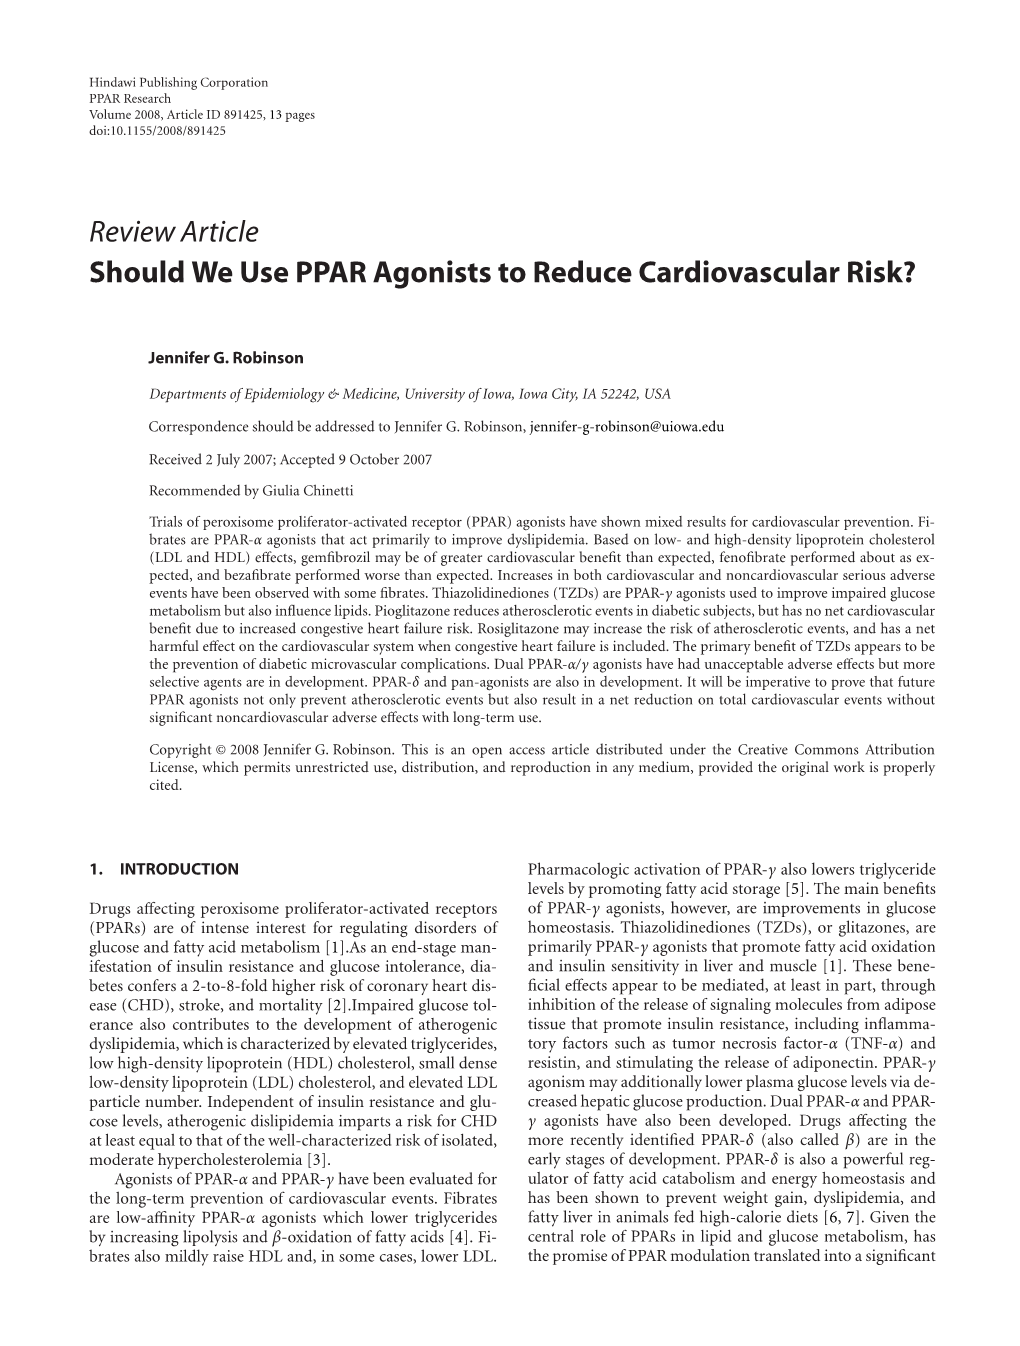 Should We Use PPAR Agonists to Reduce Cardiovascular Risk?